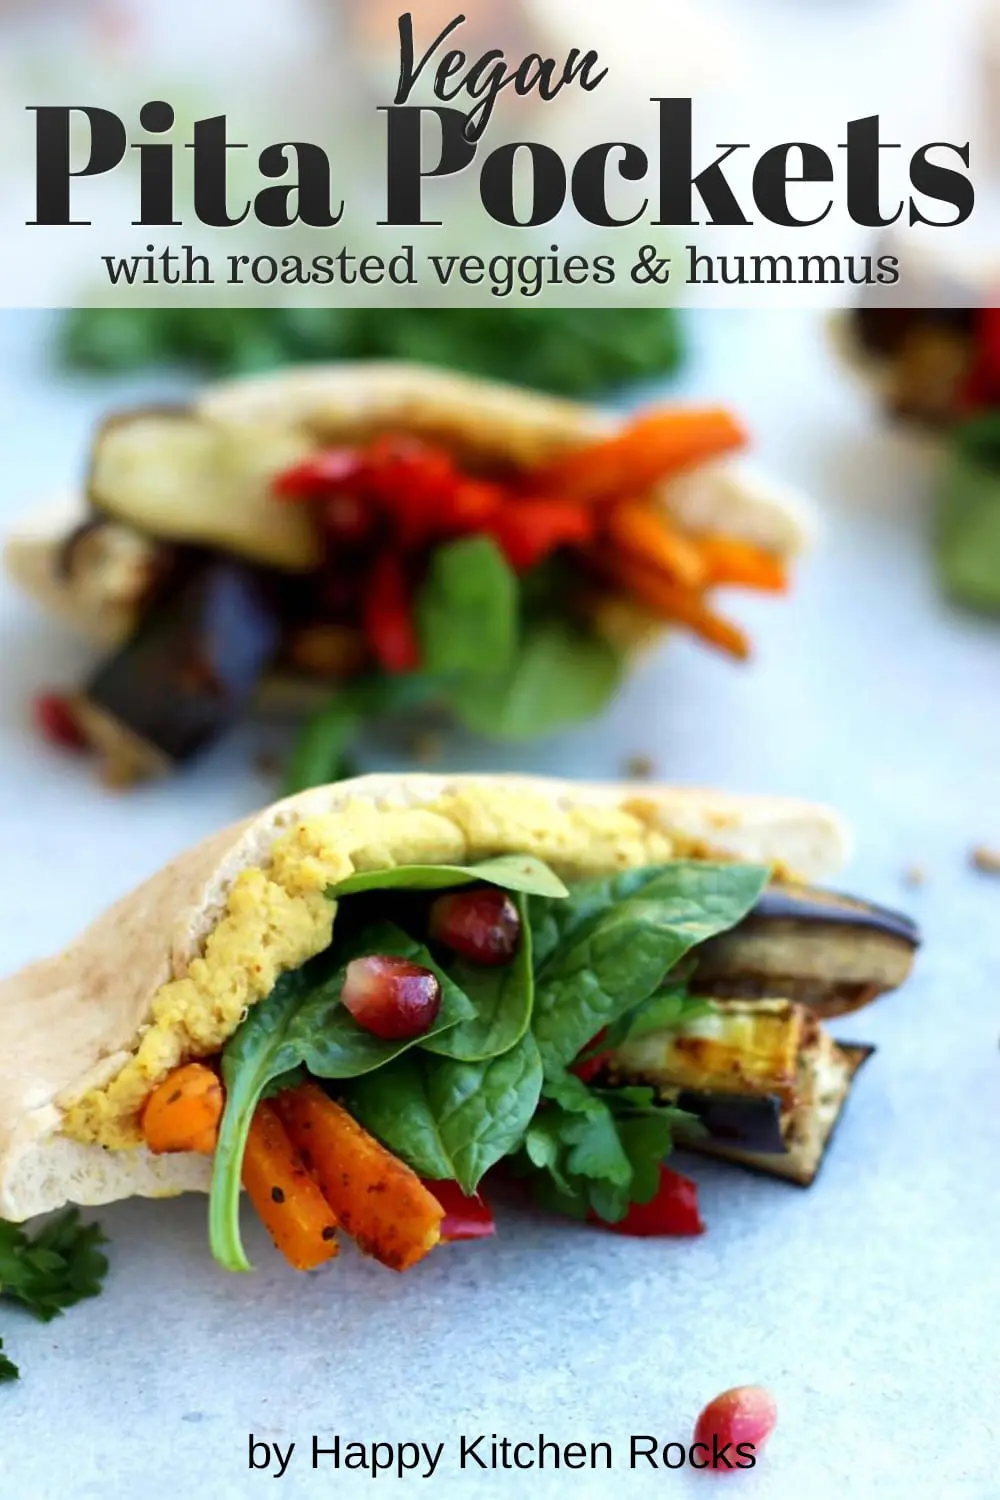 Pita Pockets with Roasted Veggies and Hummus Collage with Text Overlay